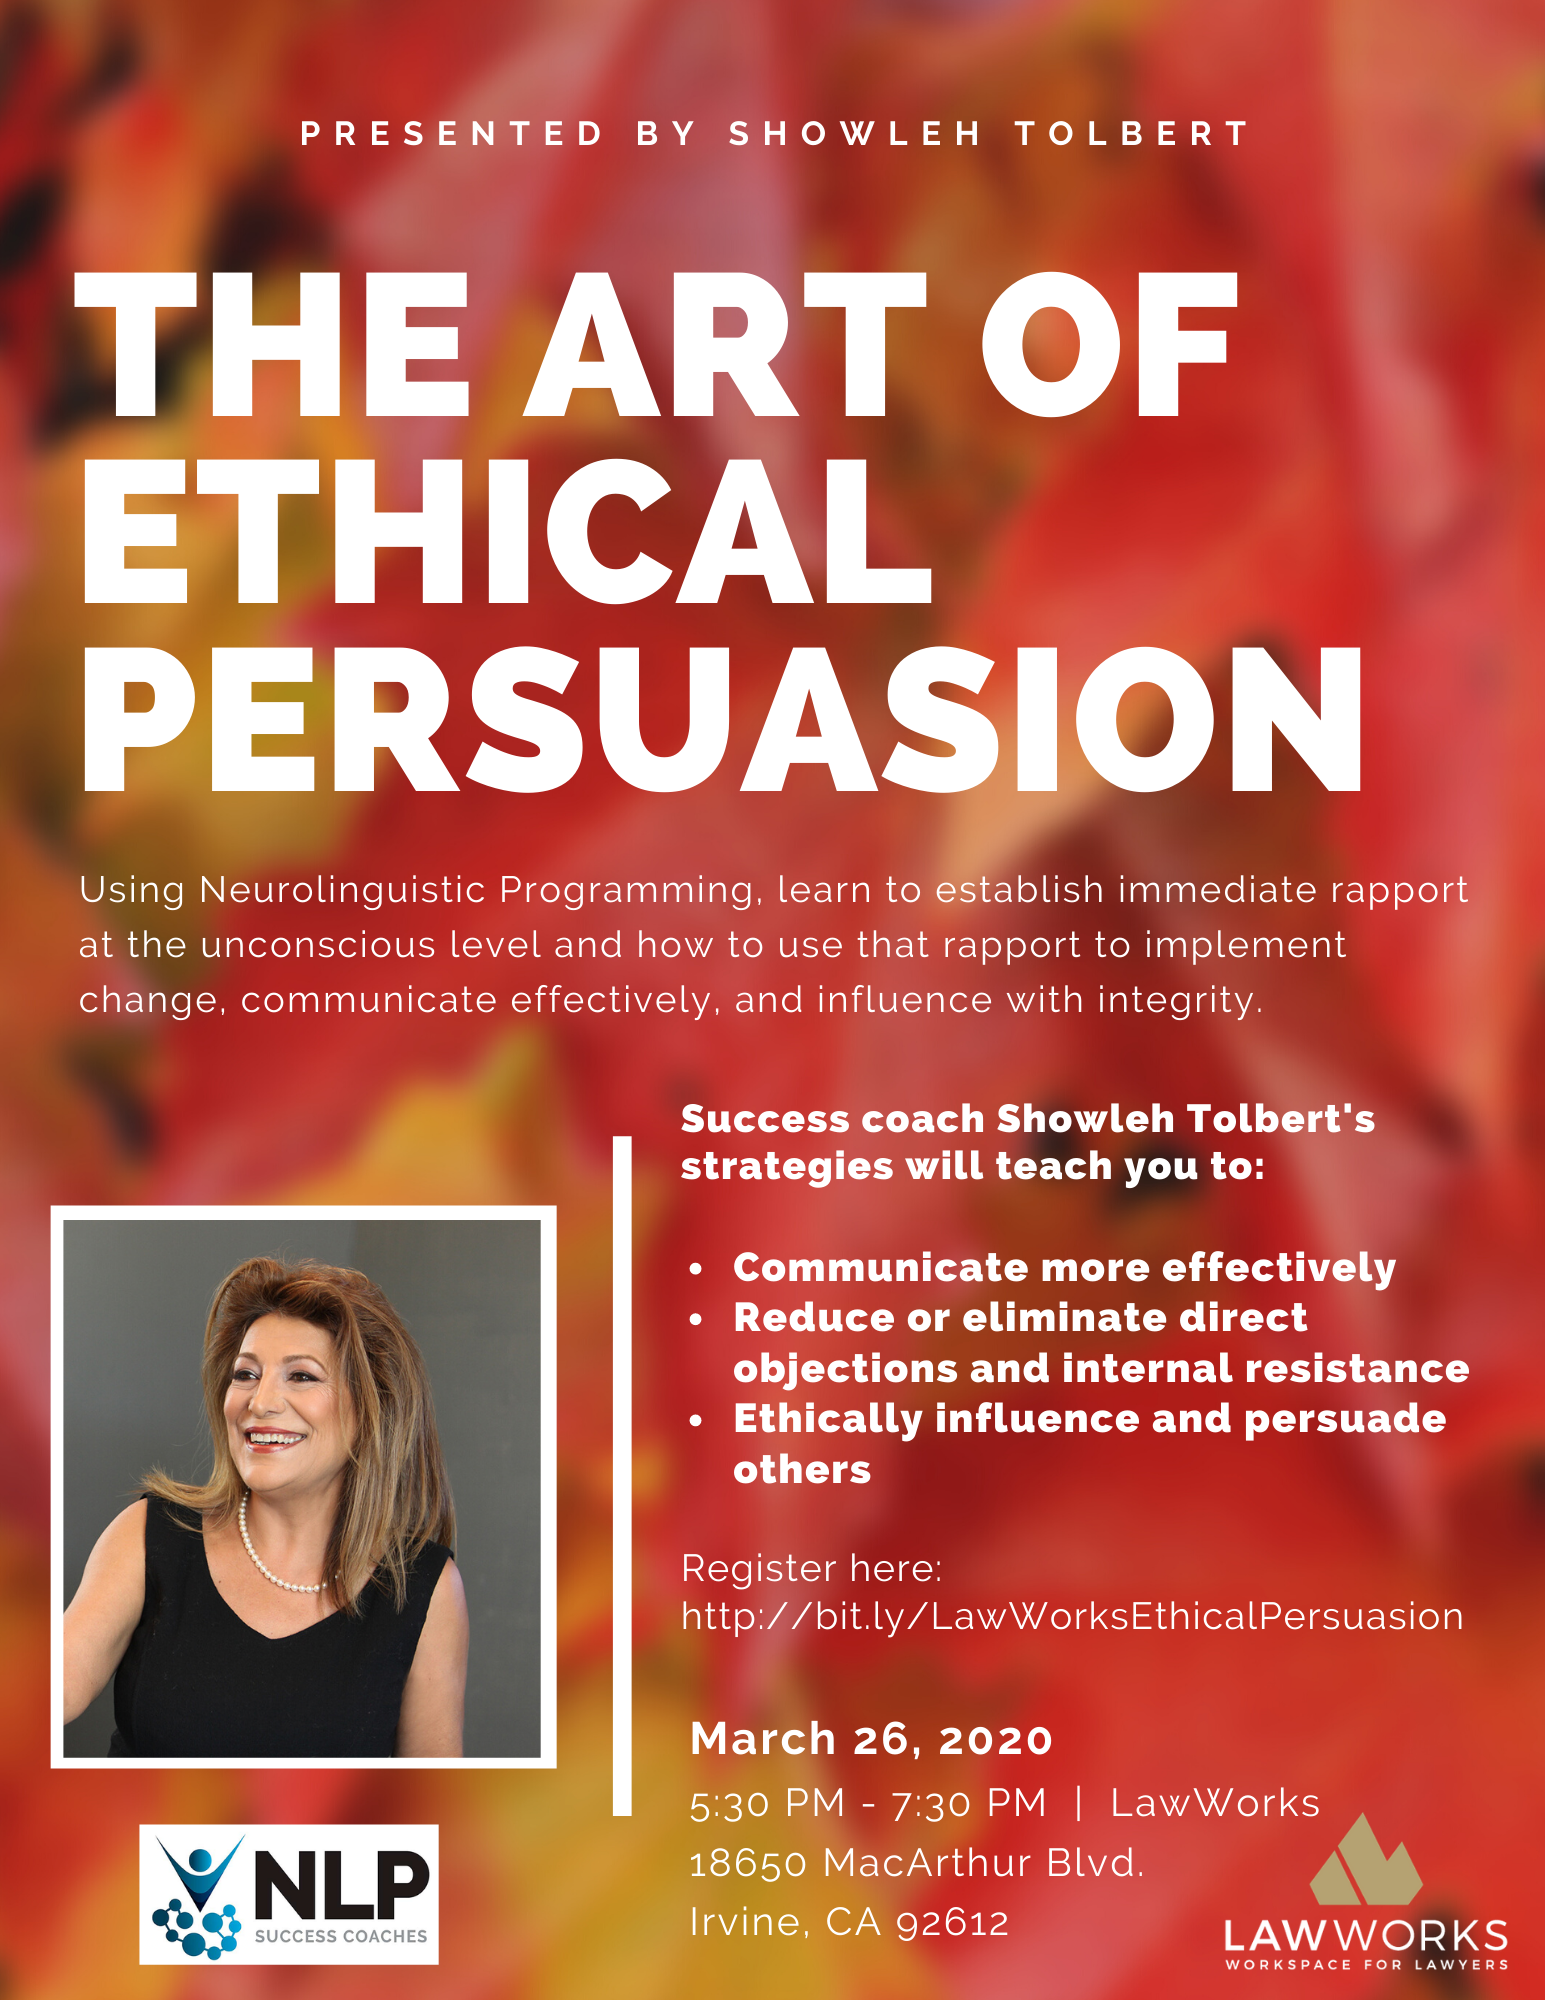 POSTPONED - The Art of Ethical Persuasion